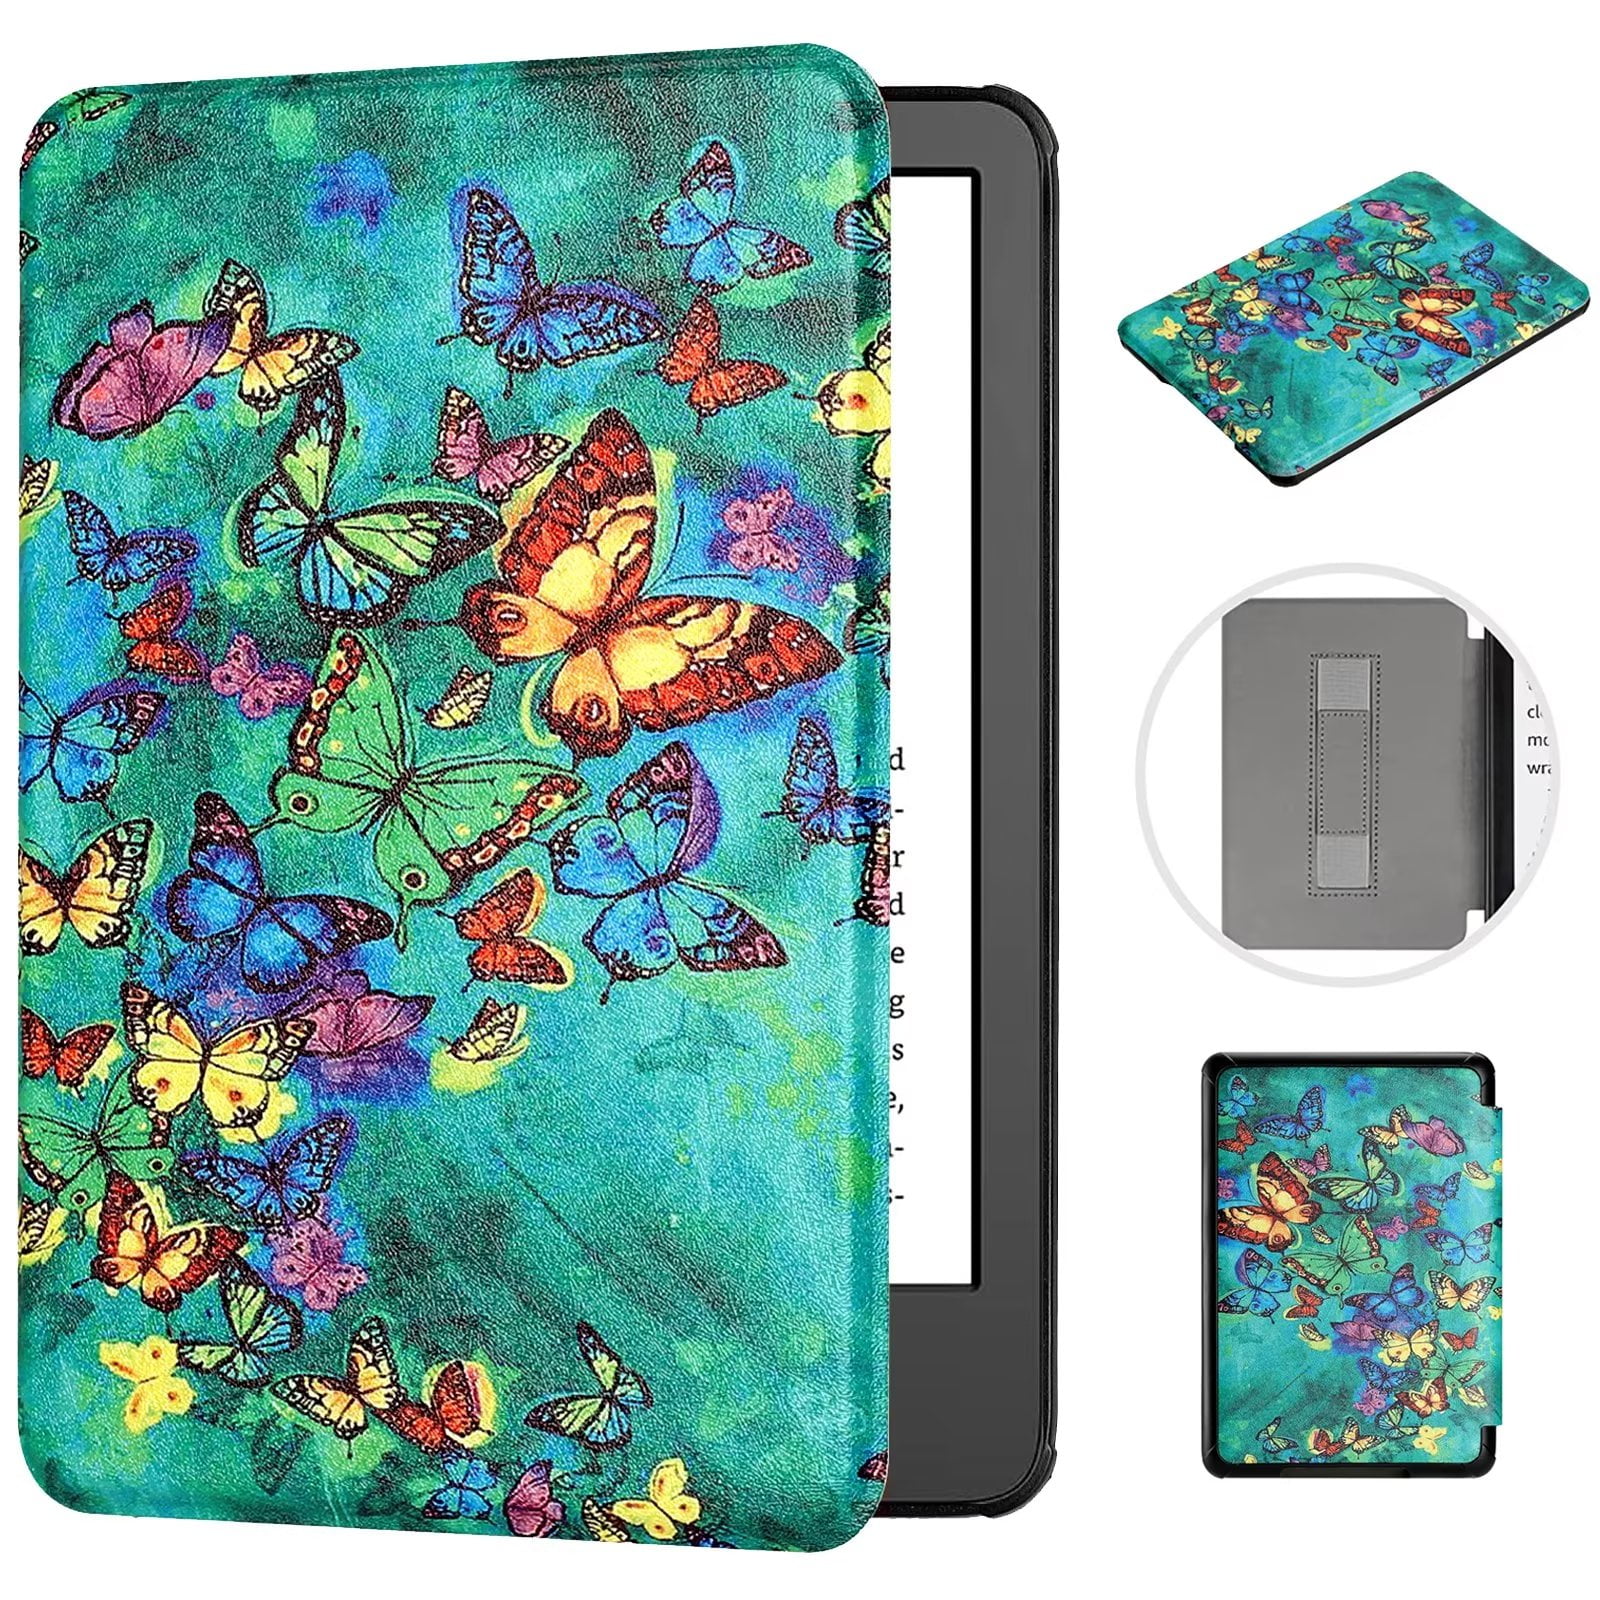 Magnetic Smart Slim Case For 6” All-new Basic Kindle 2022 Release 11th  Generation 6 Inch Gen C2v2l3 Cover Sleeve Colorful Funda - AliExpress